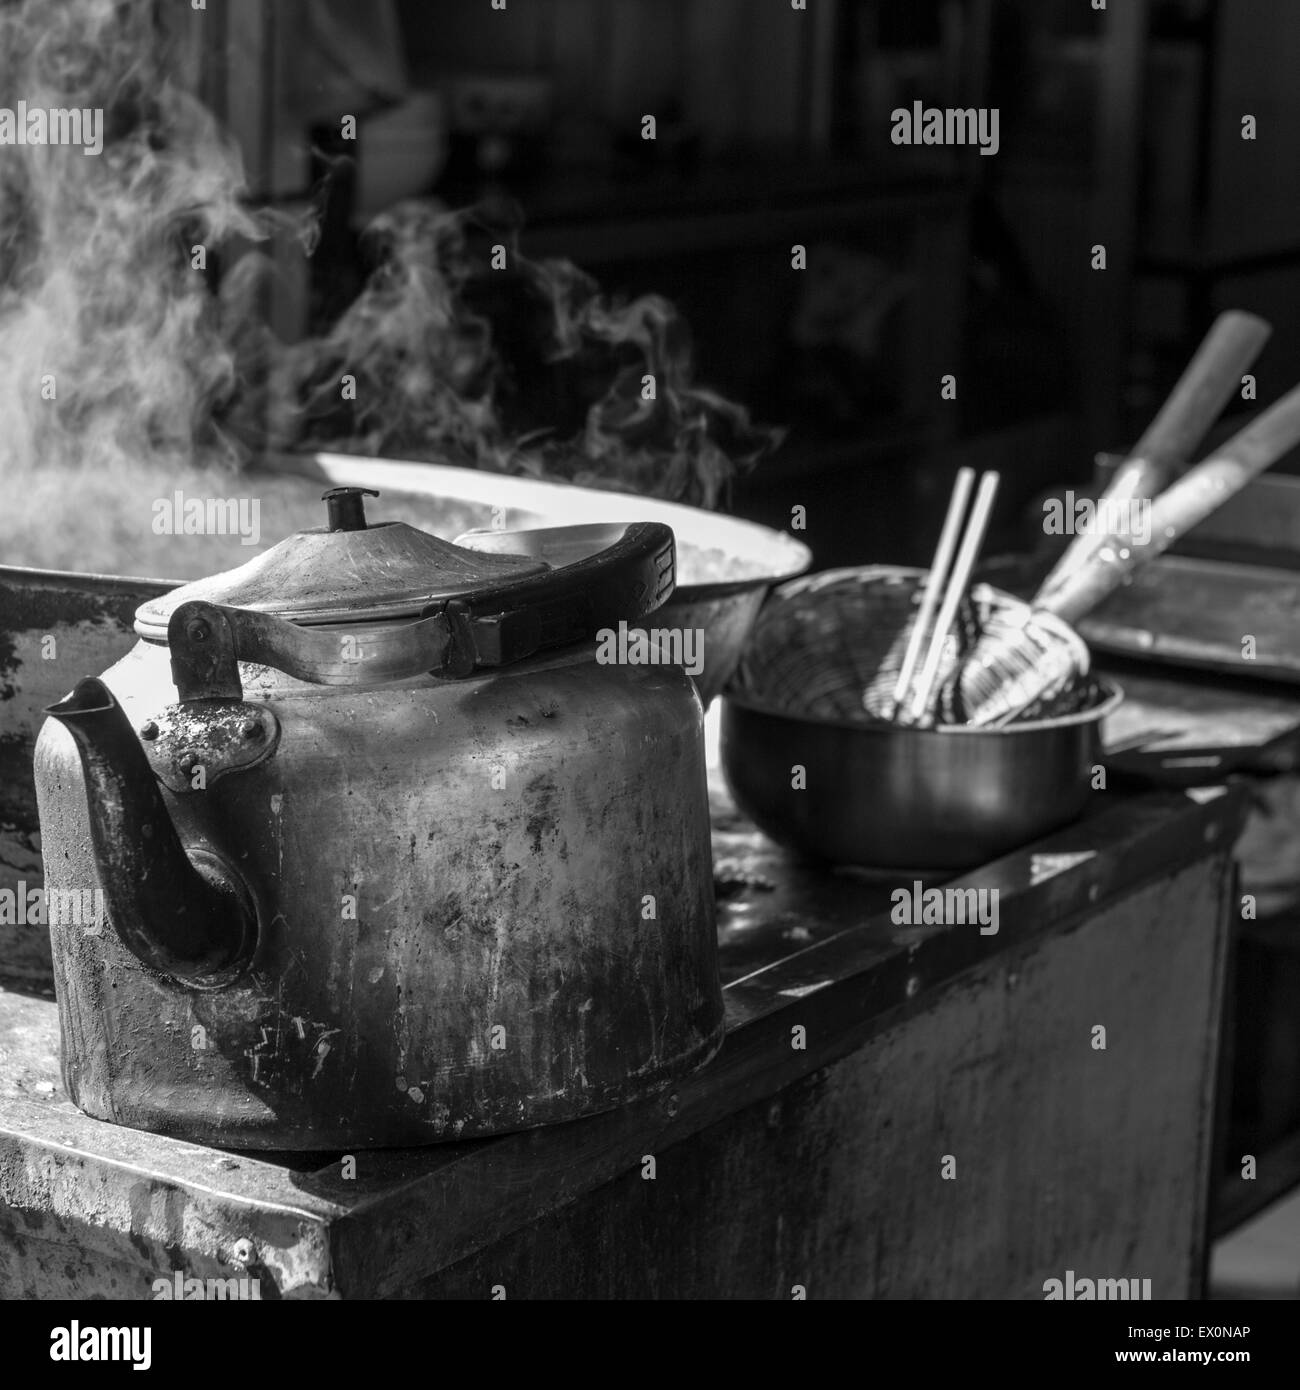 Steaming pot and teapot at food stand in Muslim Market, Xi'an, China Stock Photo